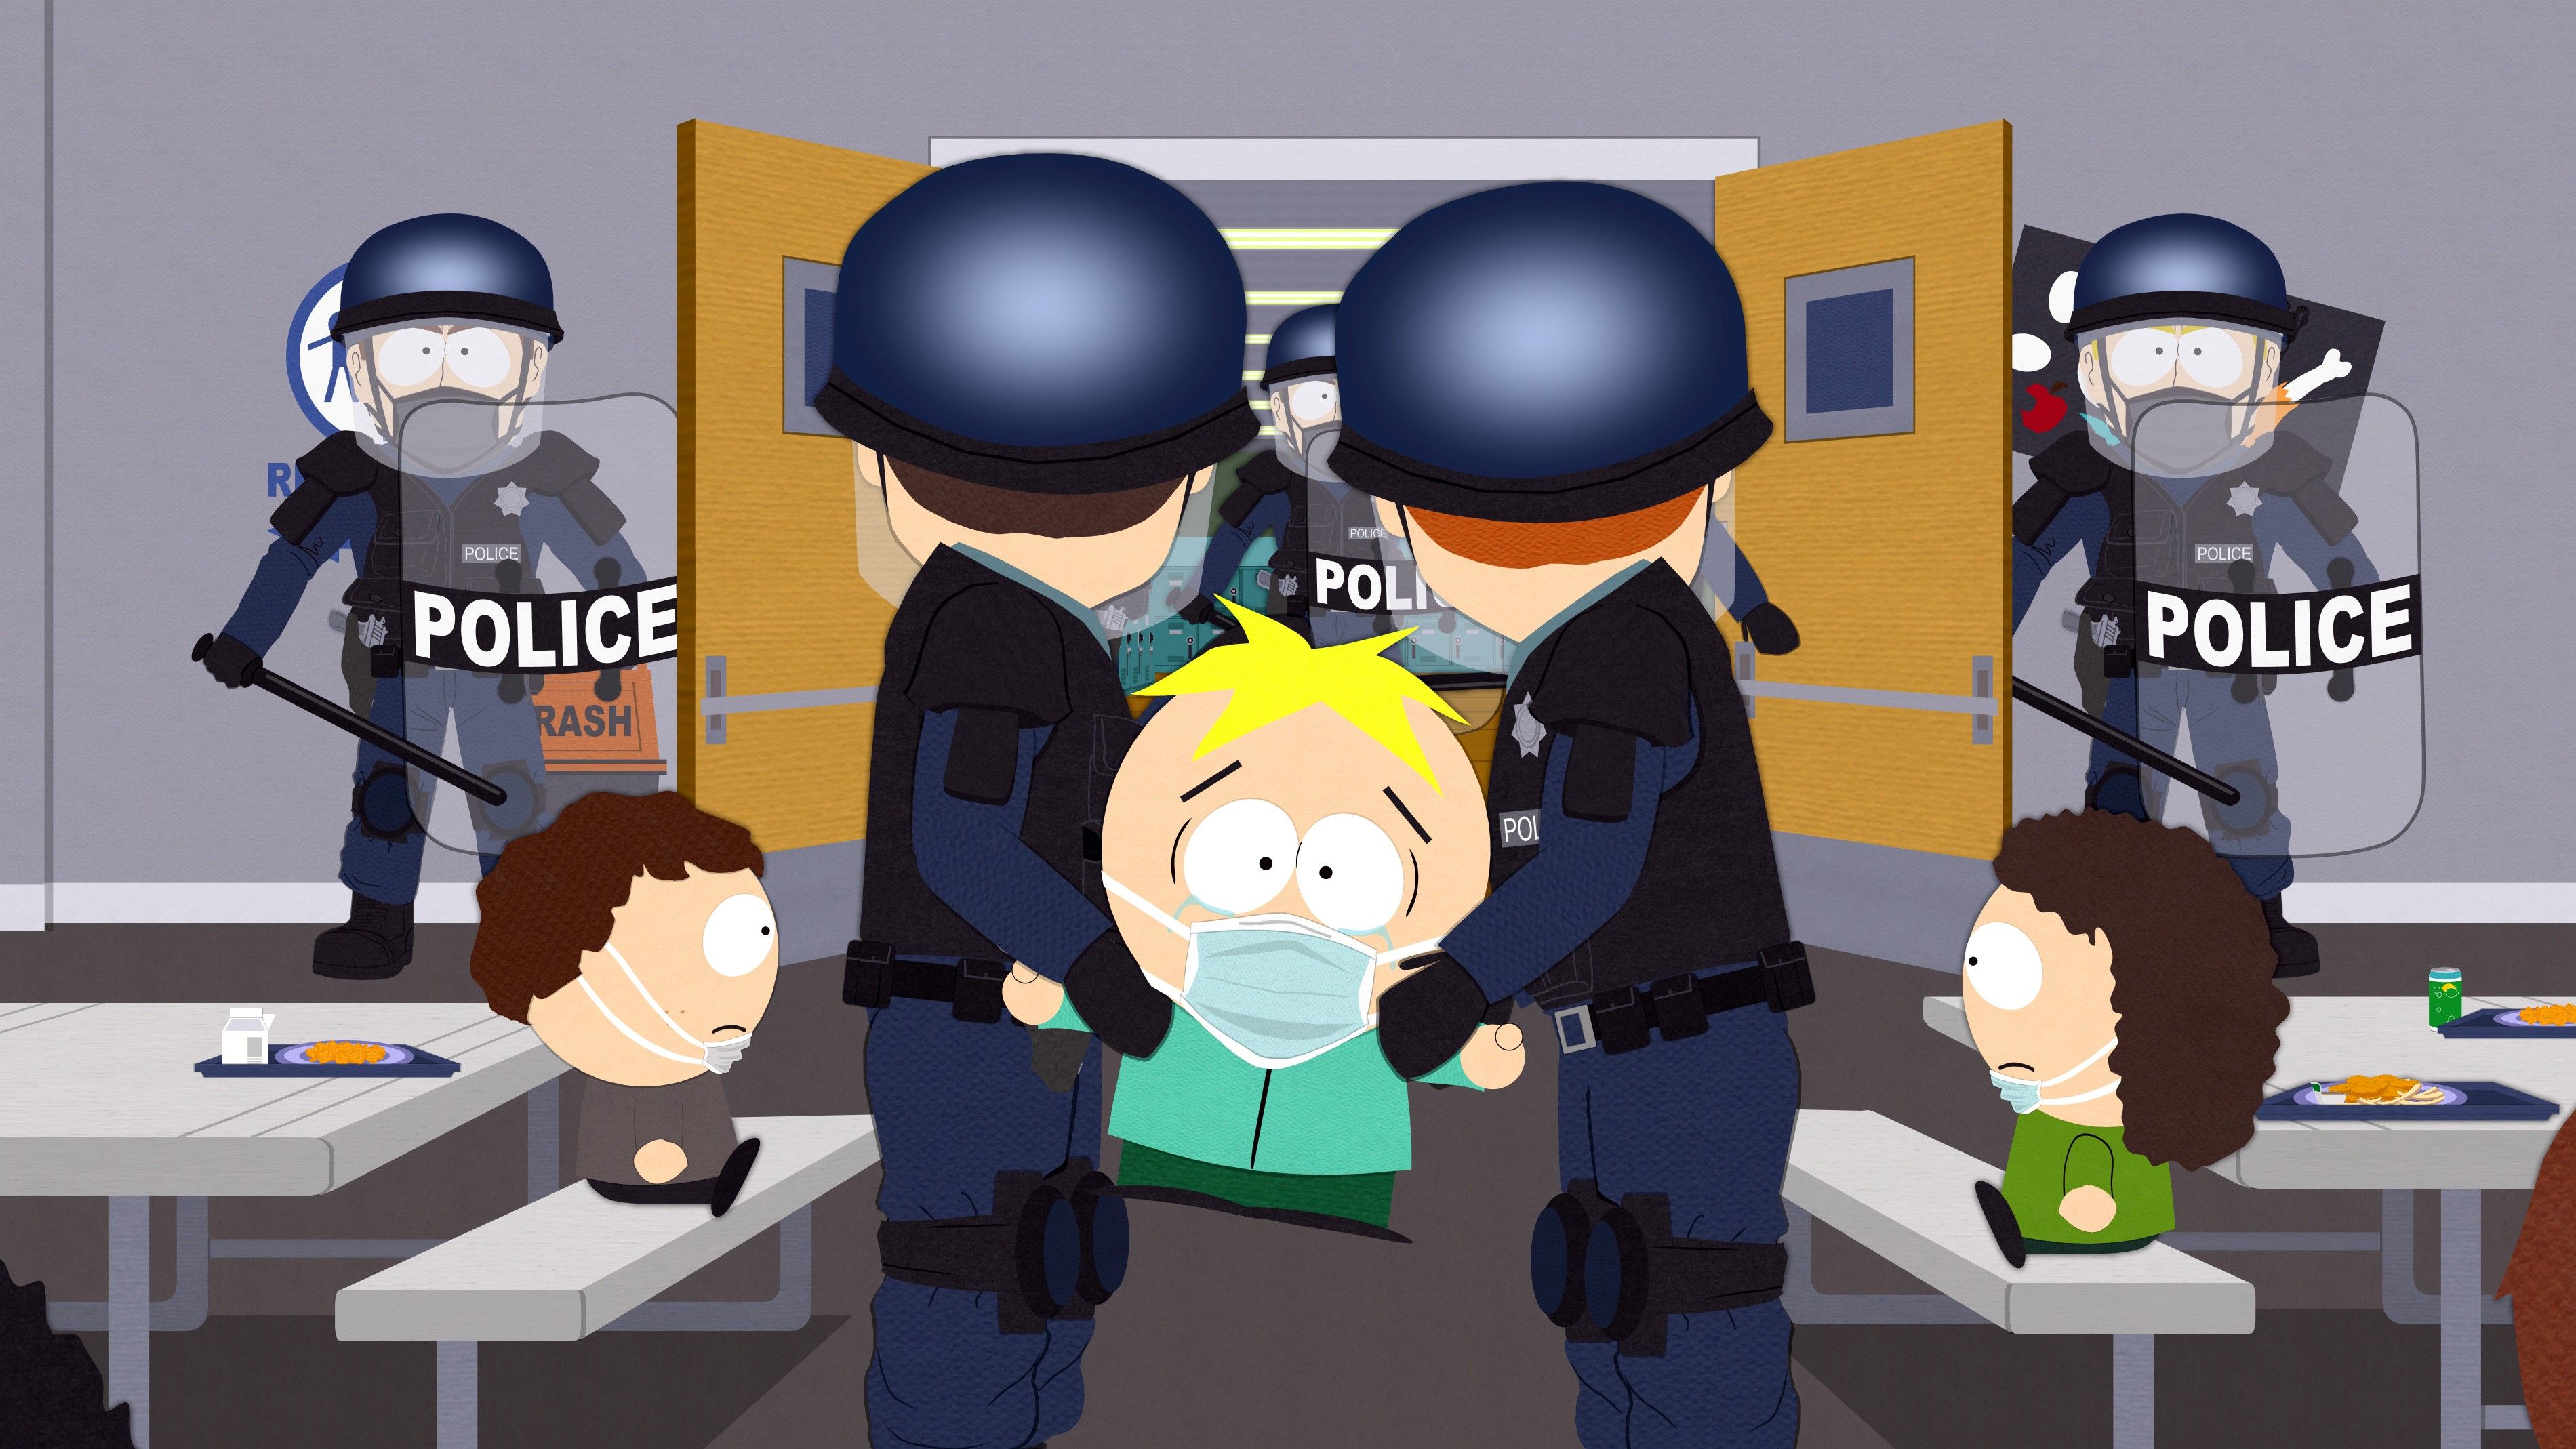 South Park police drag Butters away